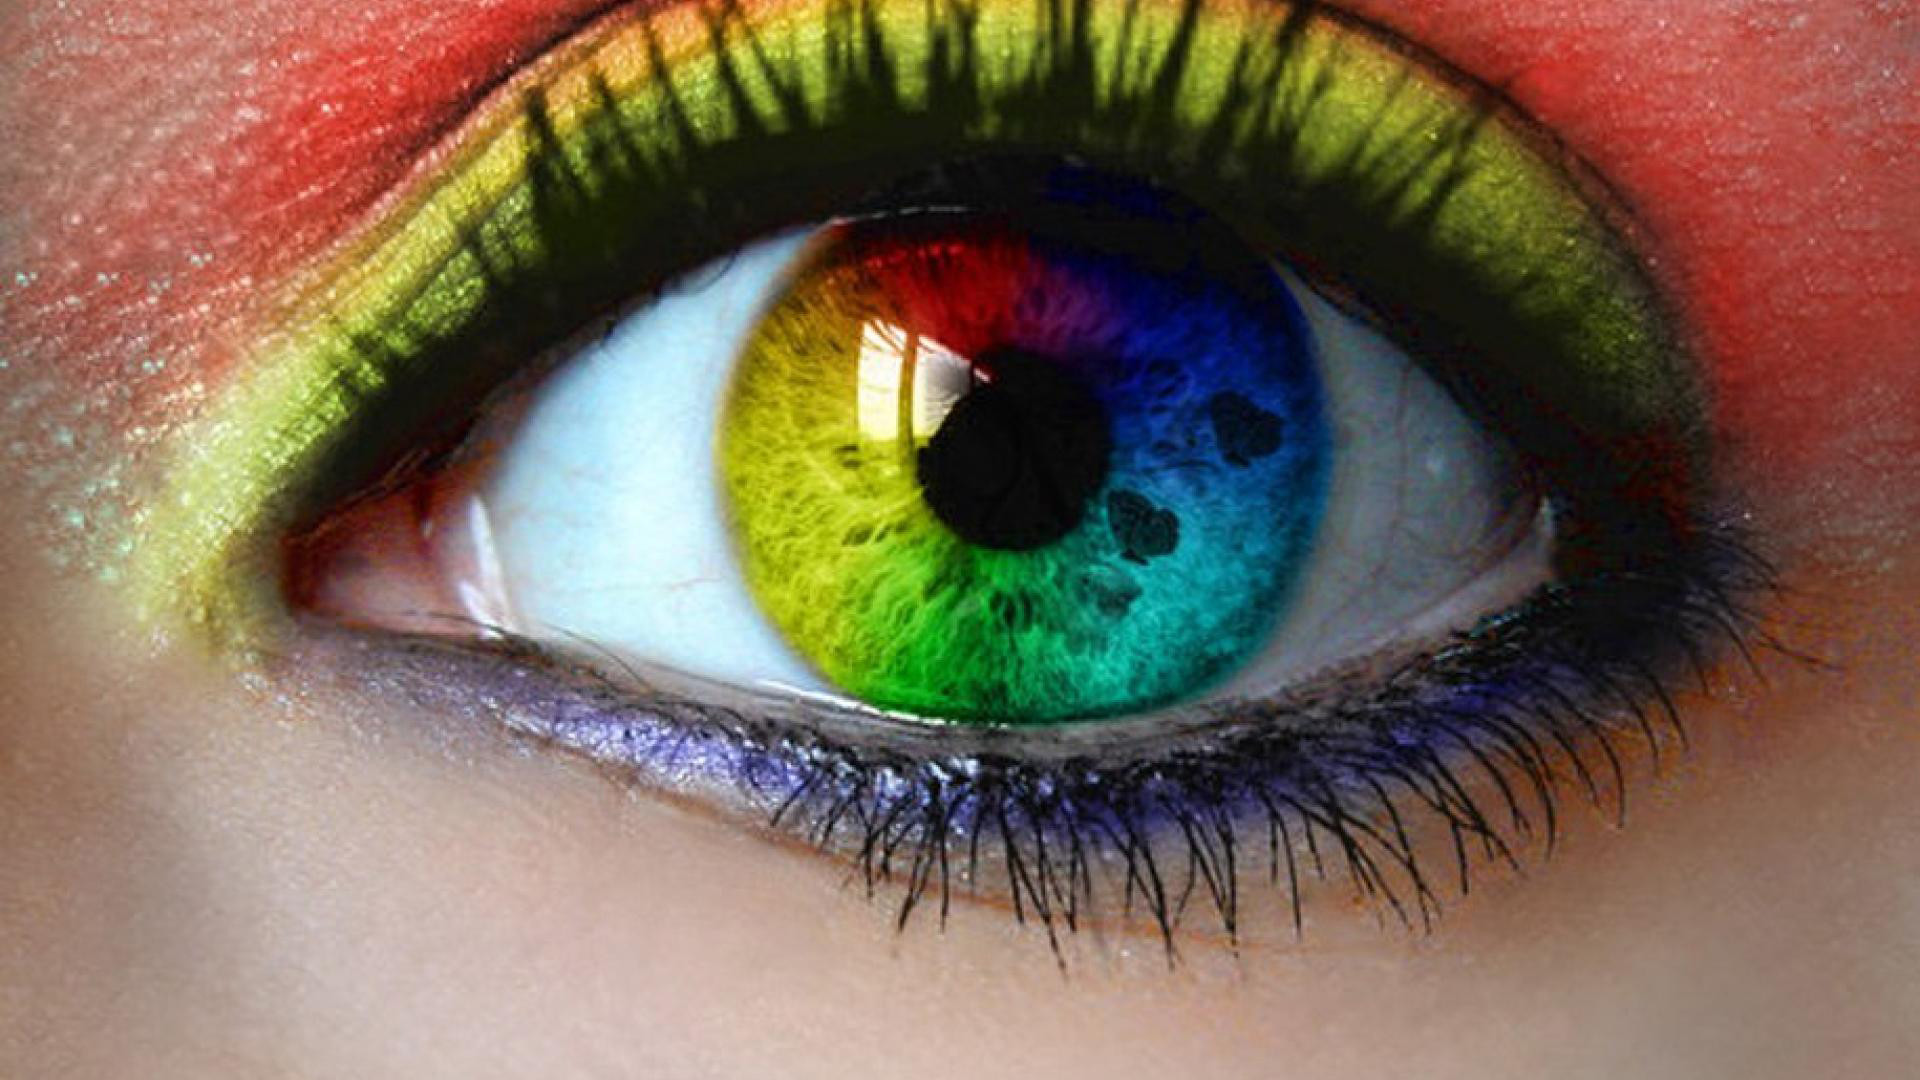 Beautiful Nature Wallpapers For Facebook Cover Page - Colorful Eye Up Close - HD Wallpaper 